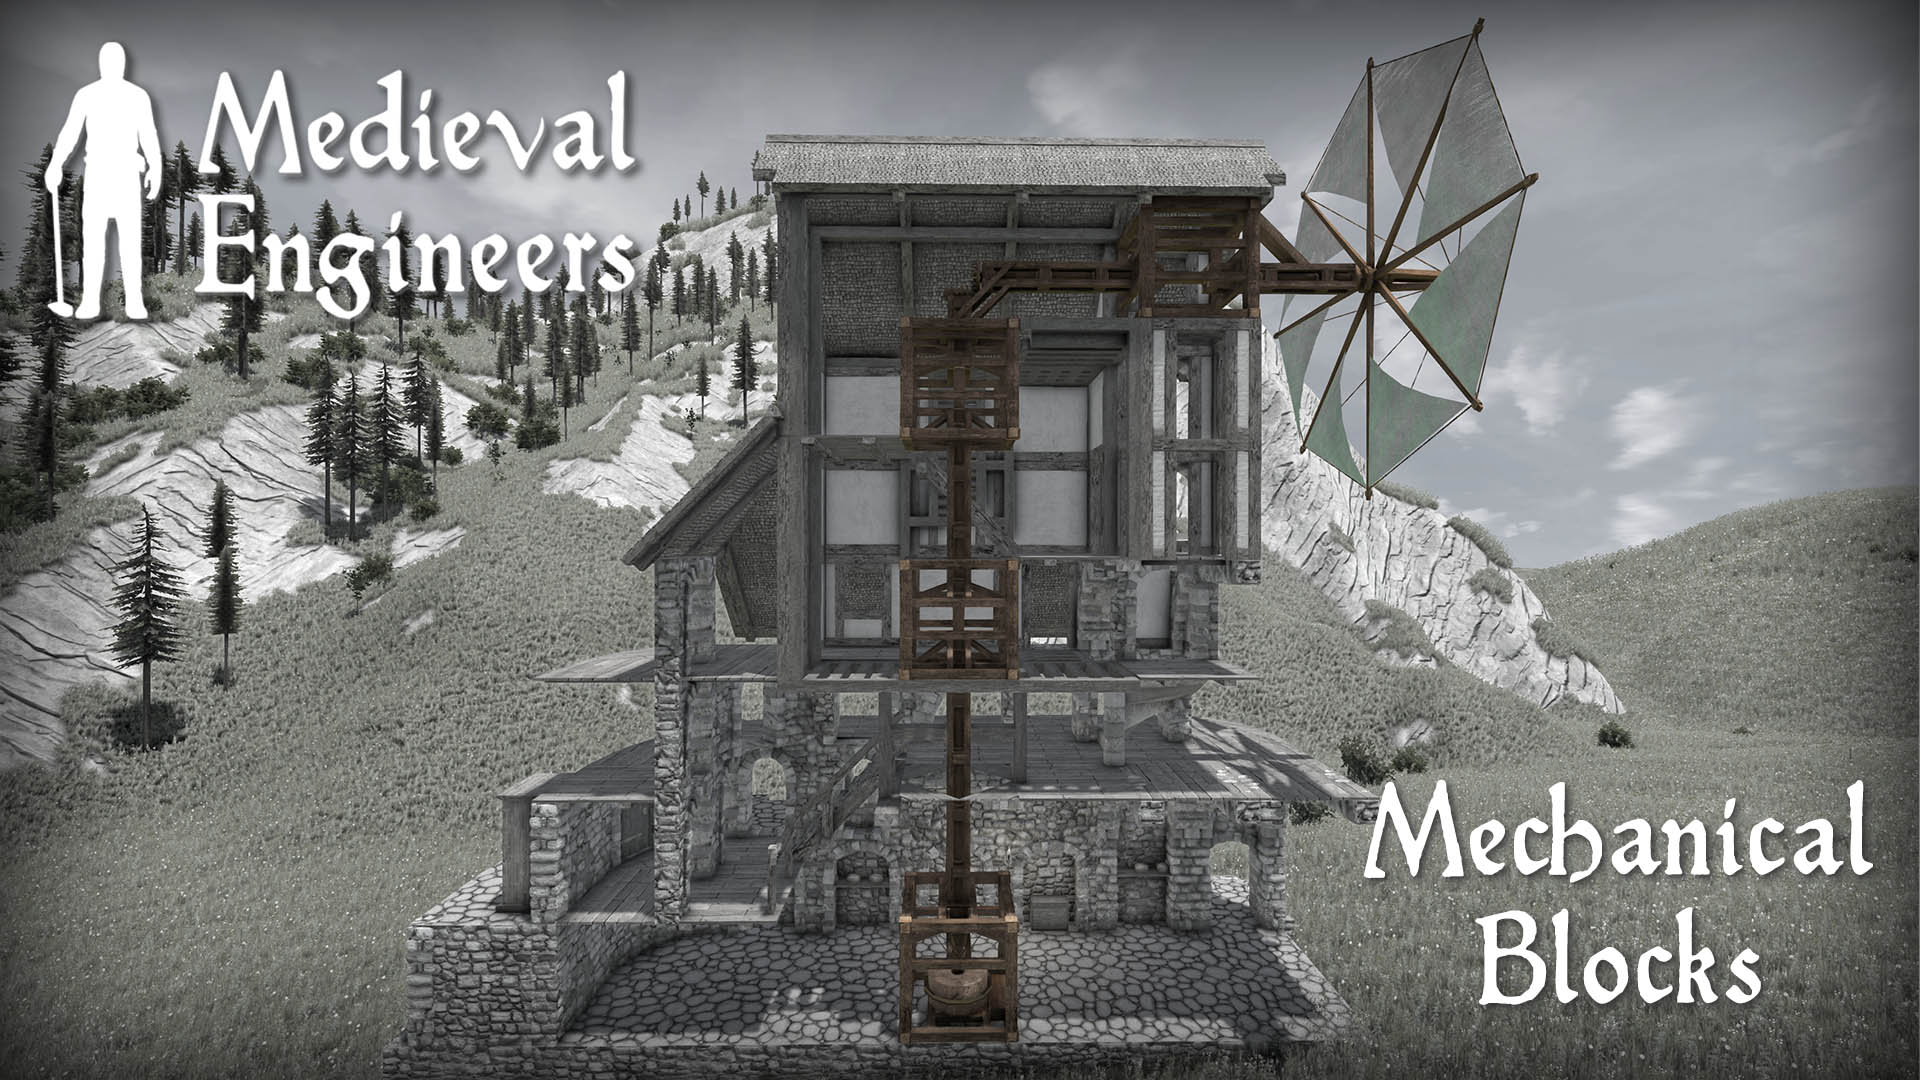 Feature Mech4 1 | Update 0.6 – Now With Mechanical Blocks!